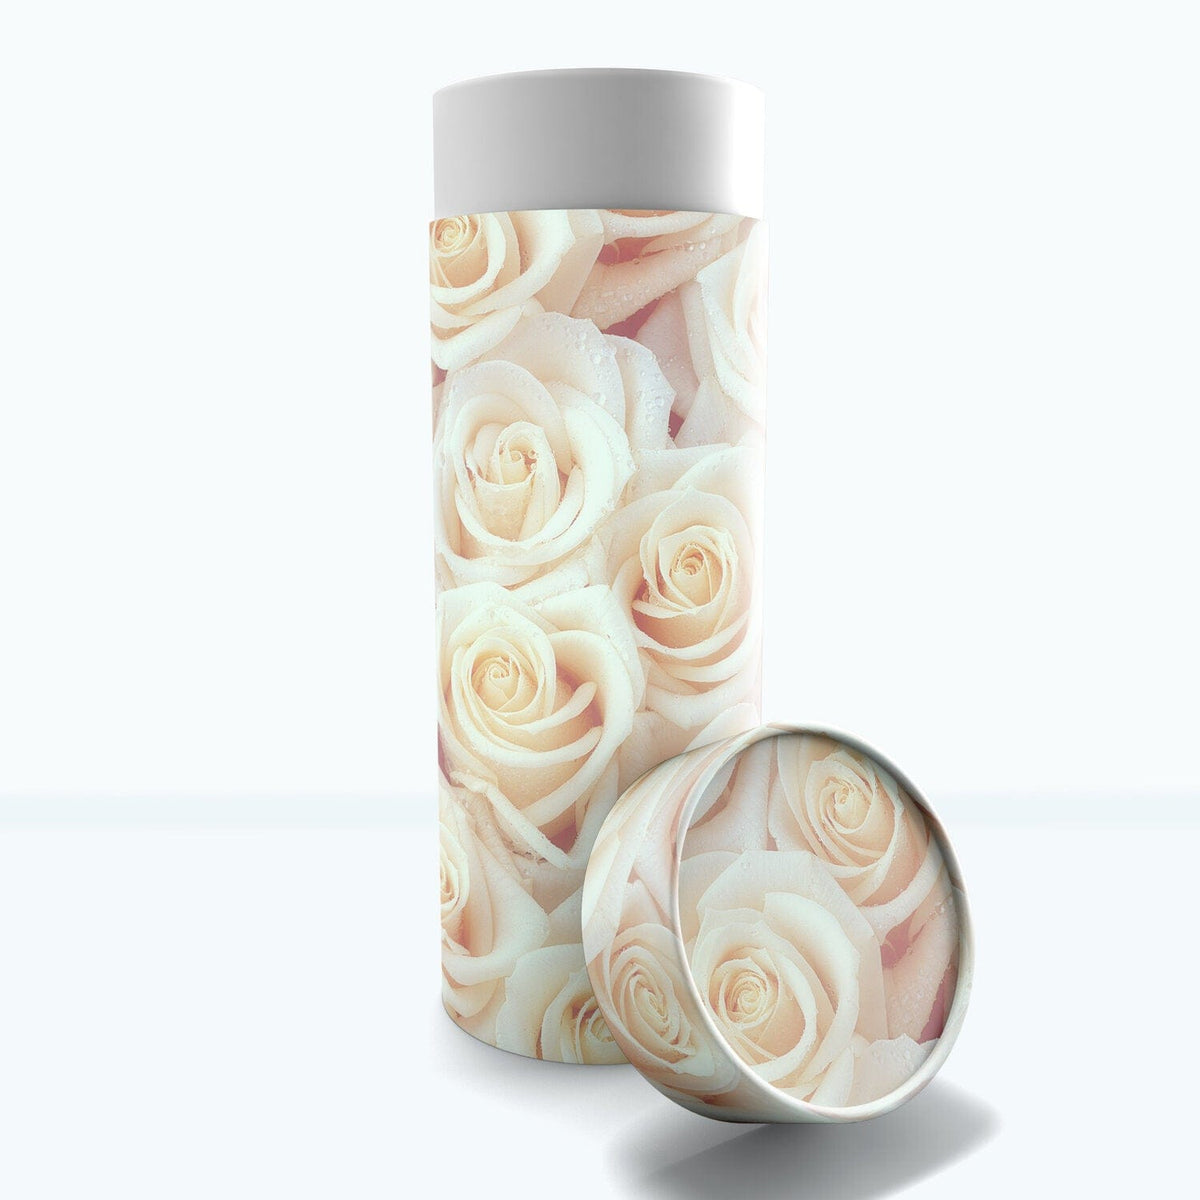 Commemorative Cremation Urns Small White Roses Biodegradable &amp; Eco Friendly Burial or Scattering Urn / Tube